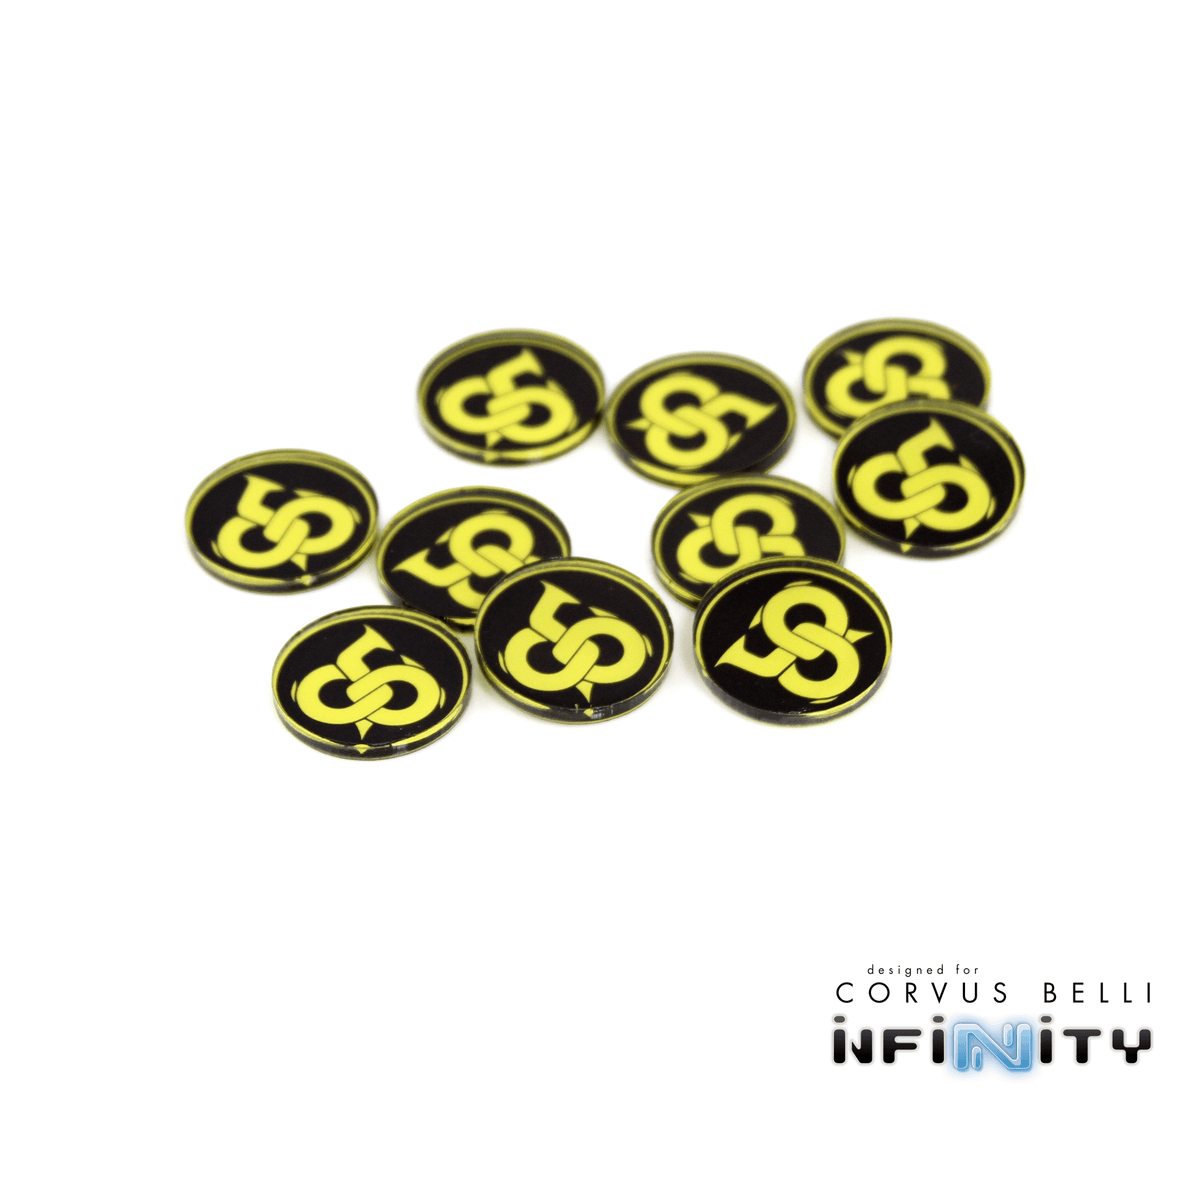 Full Color Infinity Faction Markers, 25mm (Bag of 10)